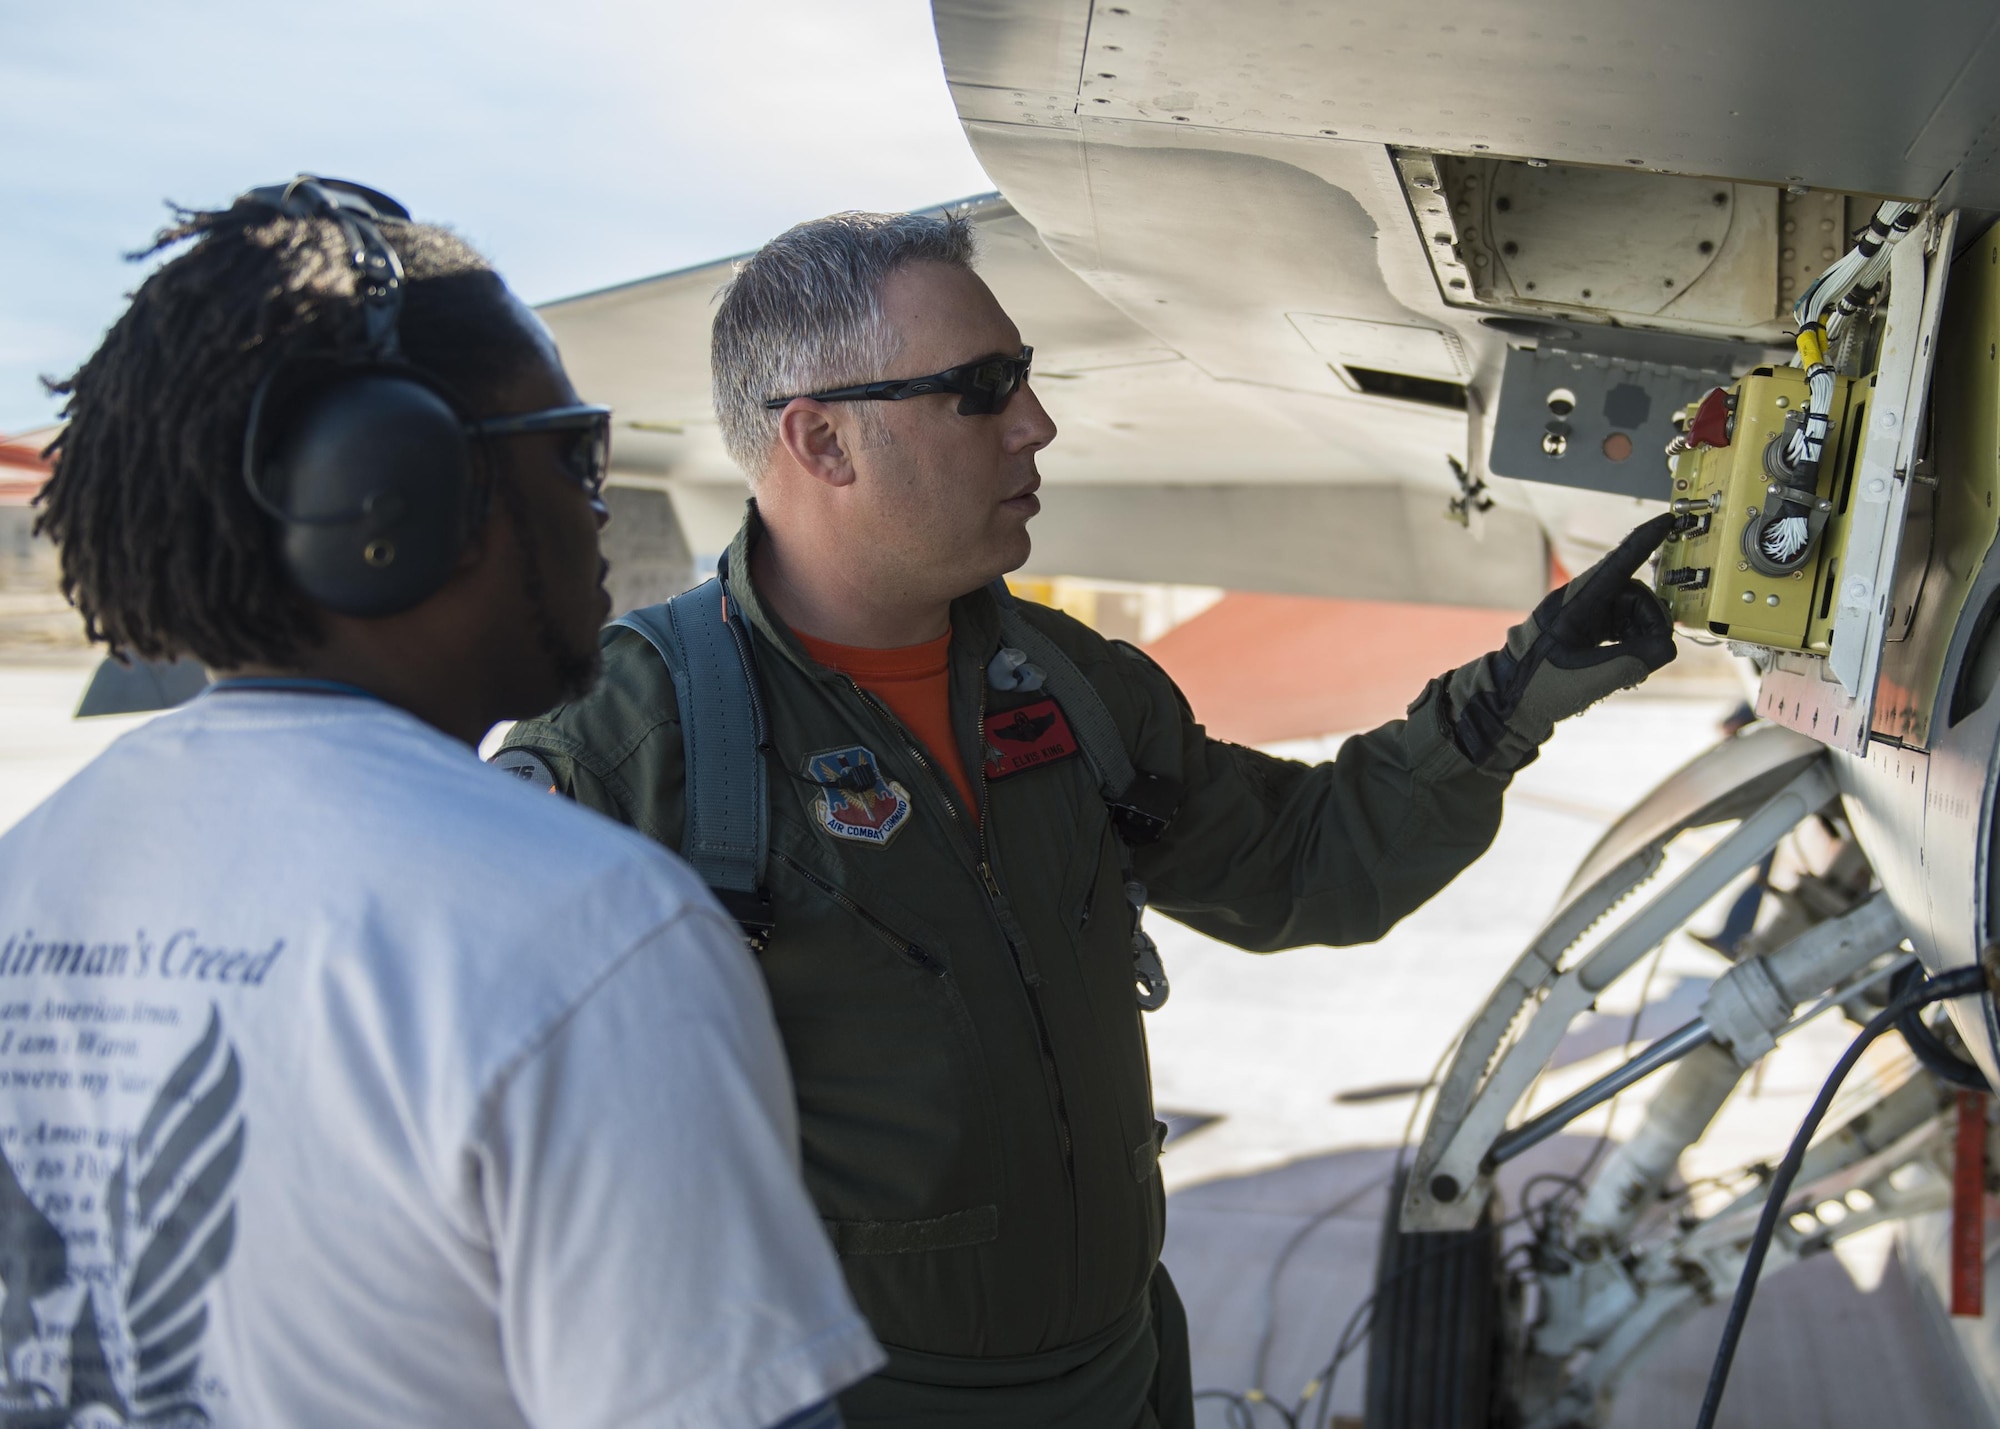 Lt. Col. Ronald King (right), the 82nd Aerial Targets Squadron, Det. 1 commander, and John Anderson (left), the 82nd ATRS, Det. 1 maintenance lead, perform a pre-flight inspection on a QF-16 drone before flight on Feb. 10, 2017 at Holloman Air Force Base, N.M. King piloted the drone during the first flight since the 82nd ATRS, Det. 1 transitioned from QF-4 Phantoms to QF-16s. The QF-16 serves as a full-scale aerial target to test next-generation weapons systems. (U.S. Air Force photo by Senior Airman Emily Kenney)